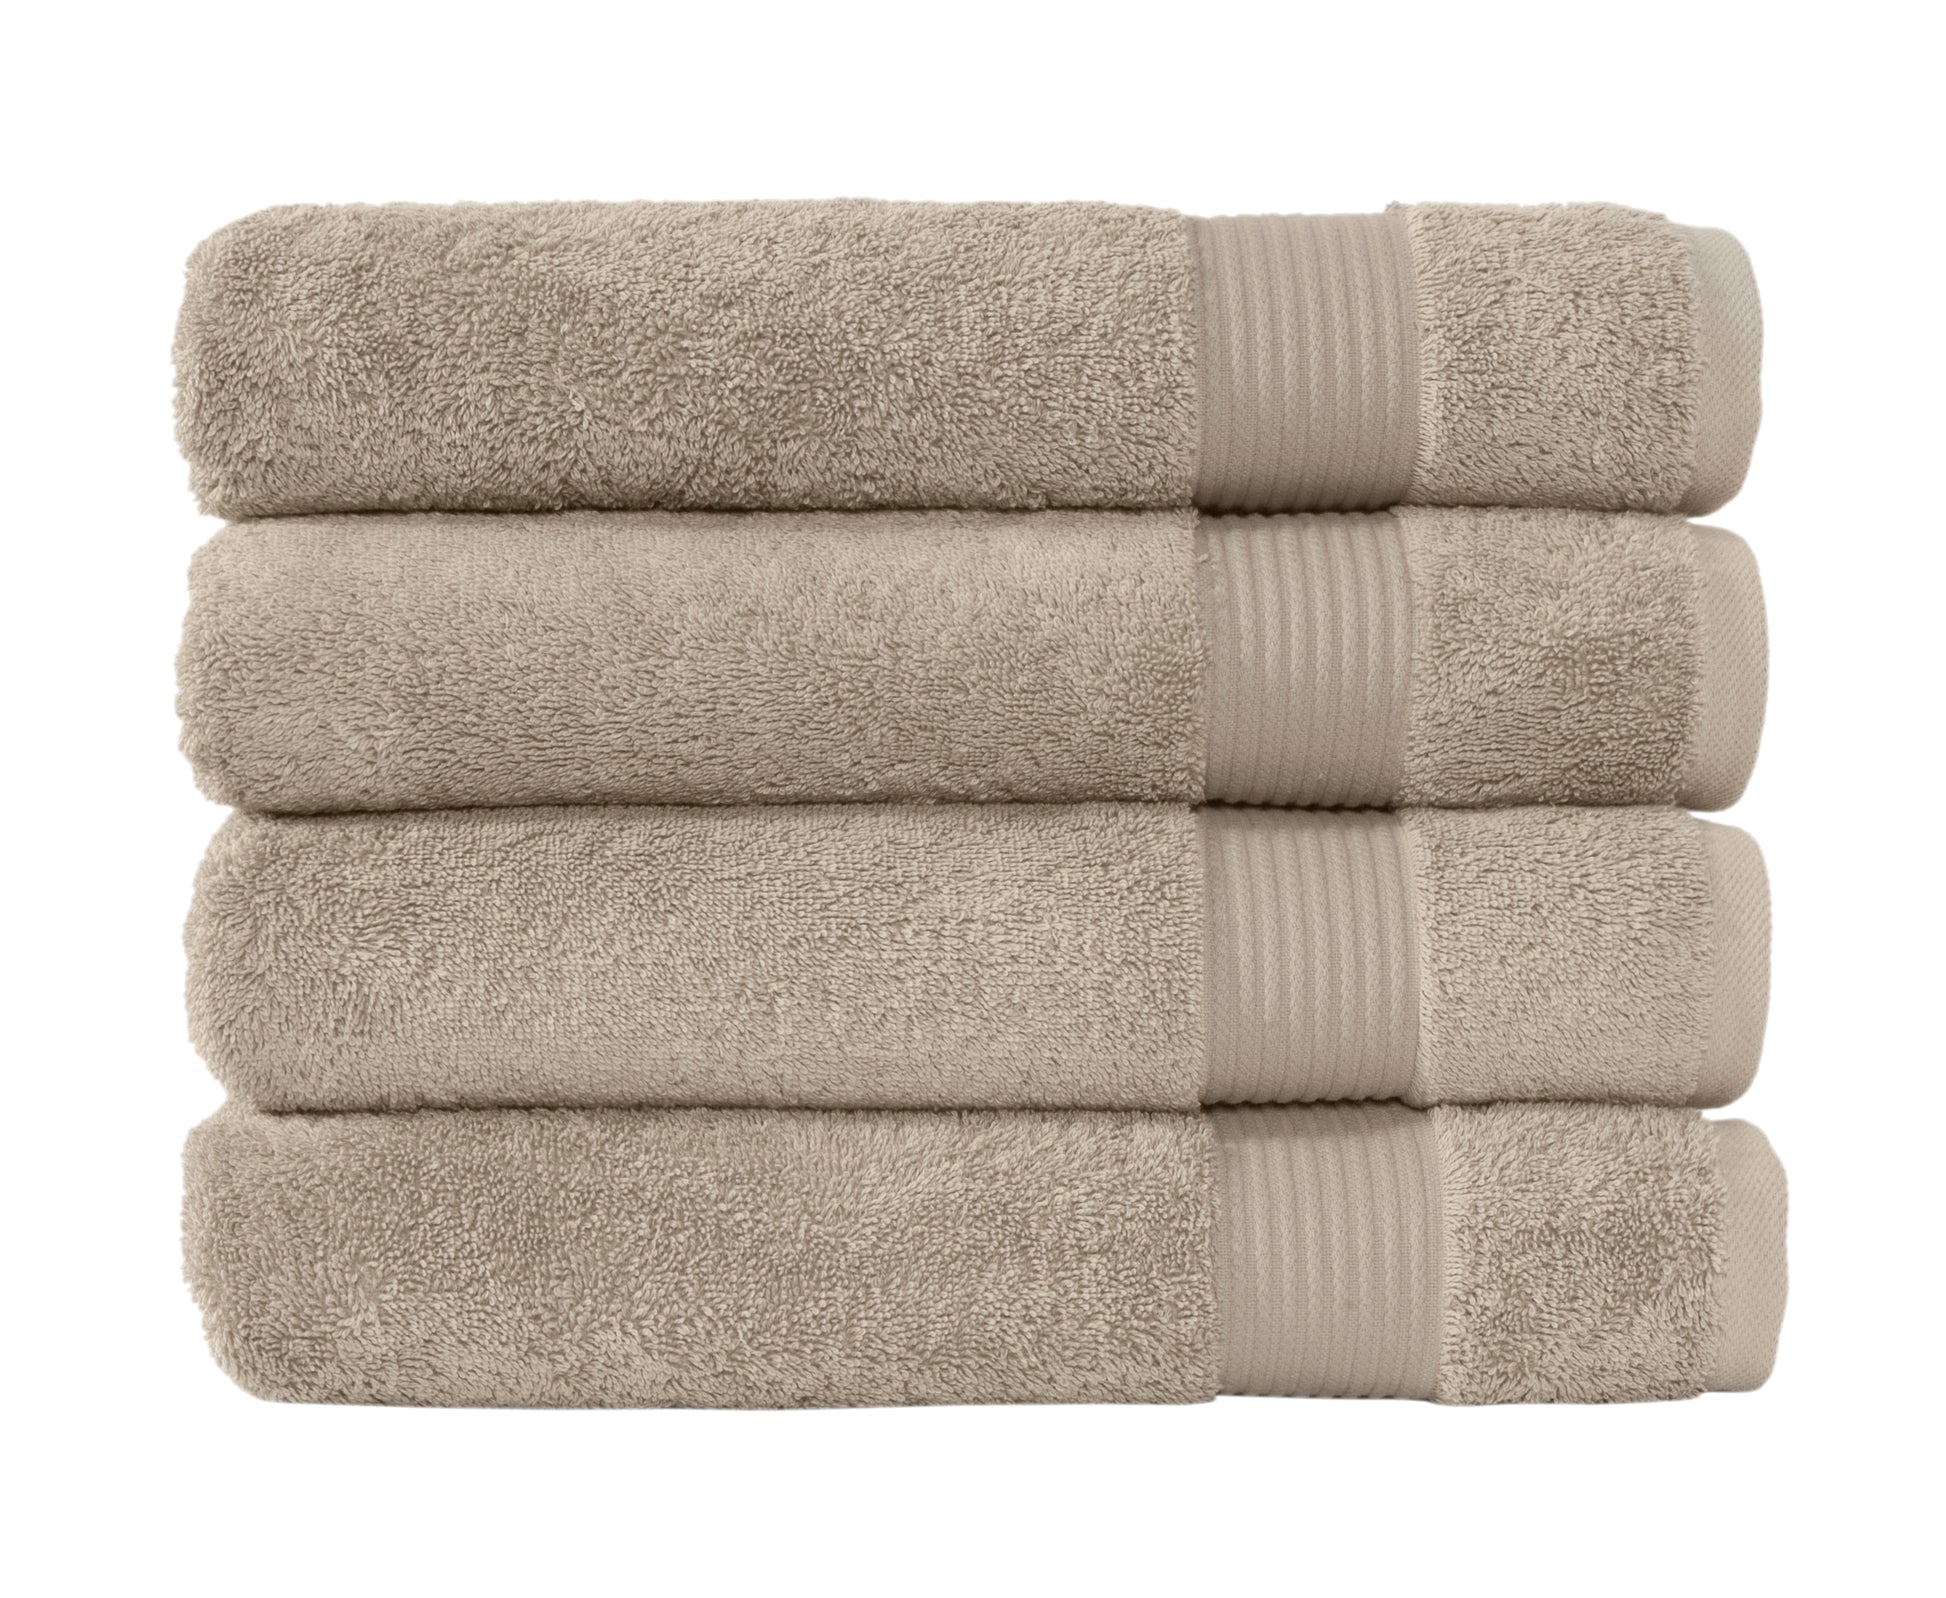 Amadeus Luxury Turkish Cotton Hotel Collection Quick Drying Bath Towels - 4 Pieces - Classic Turkish Towels